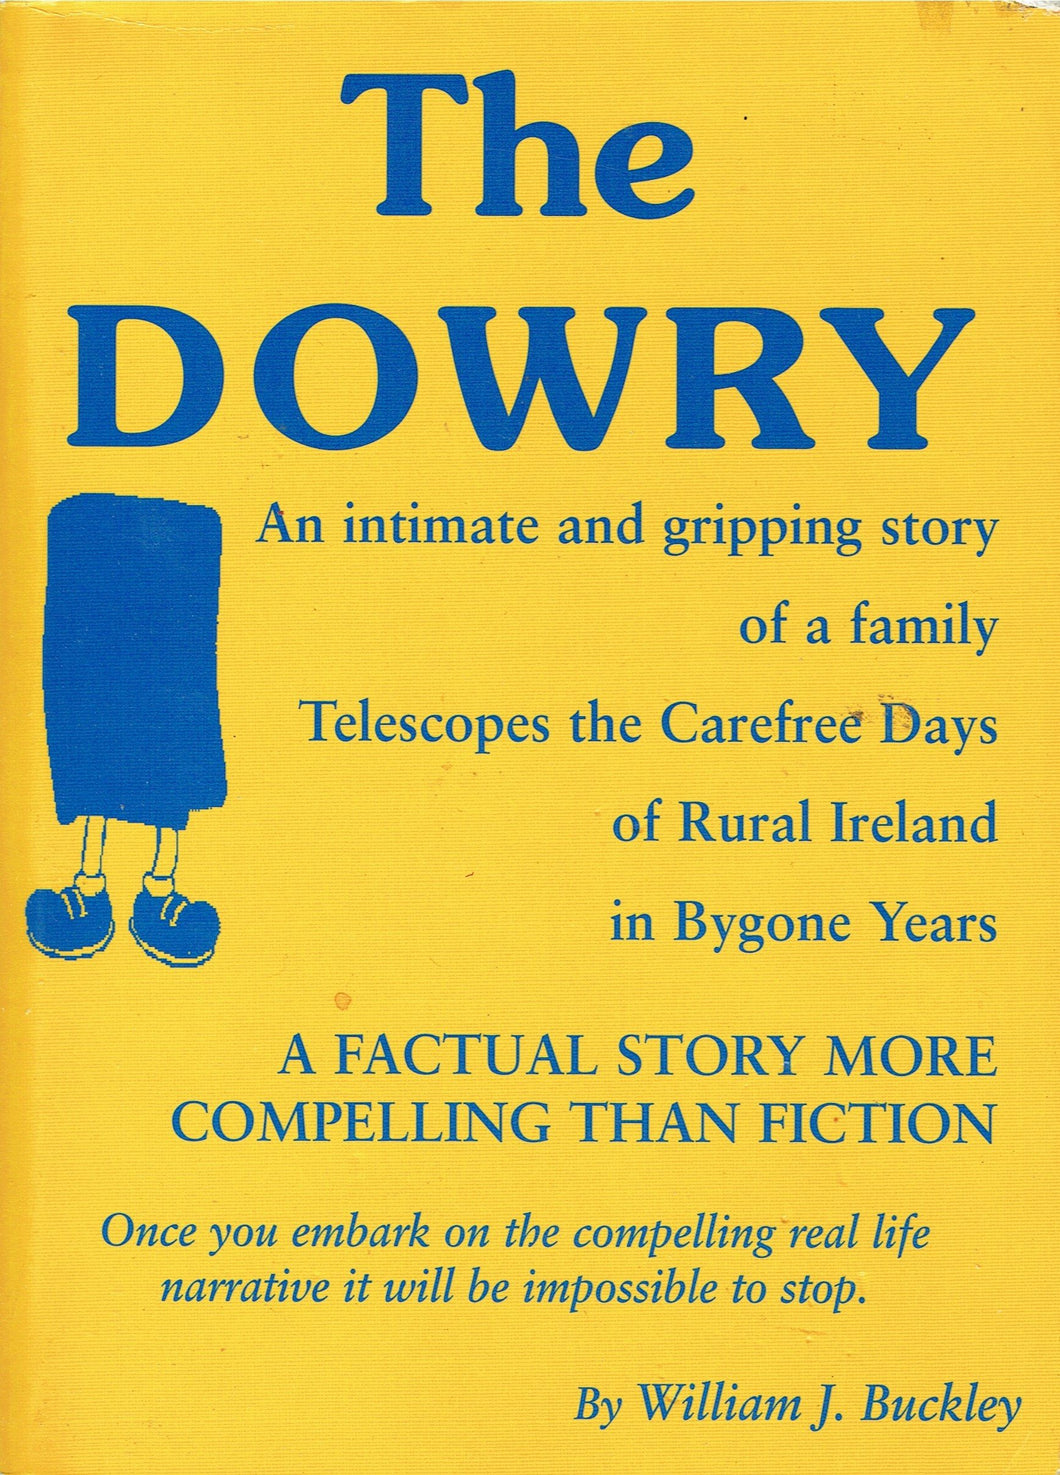 The Dowry: An Intimate and Gripping Story of a Family